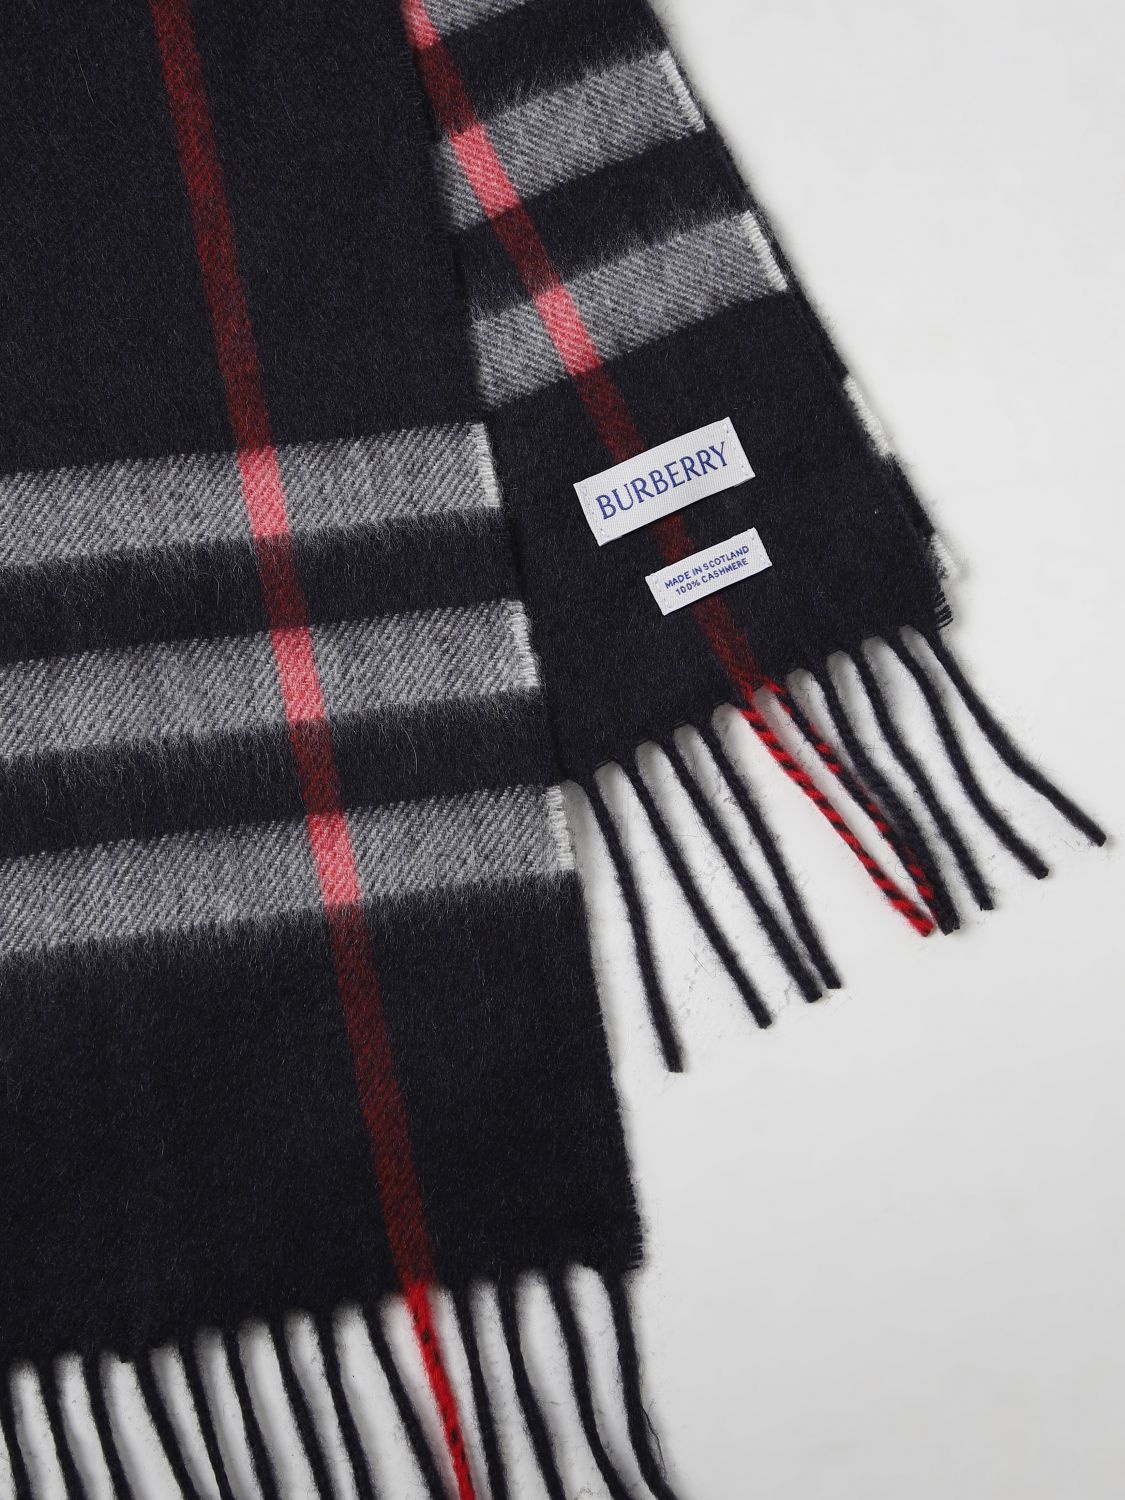 Burberry scarf for man - 3